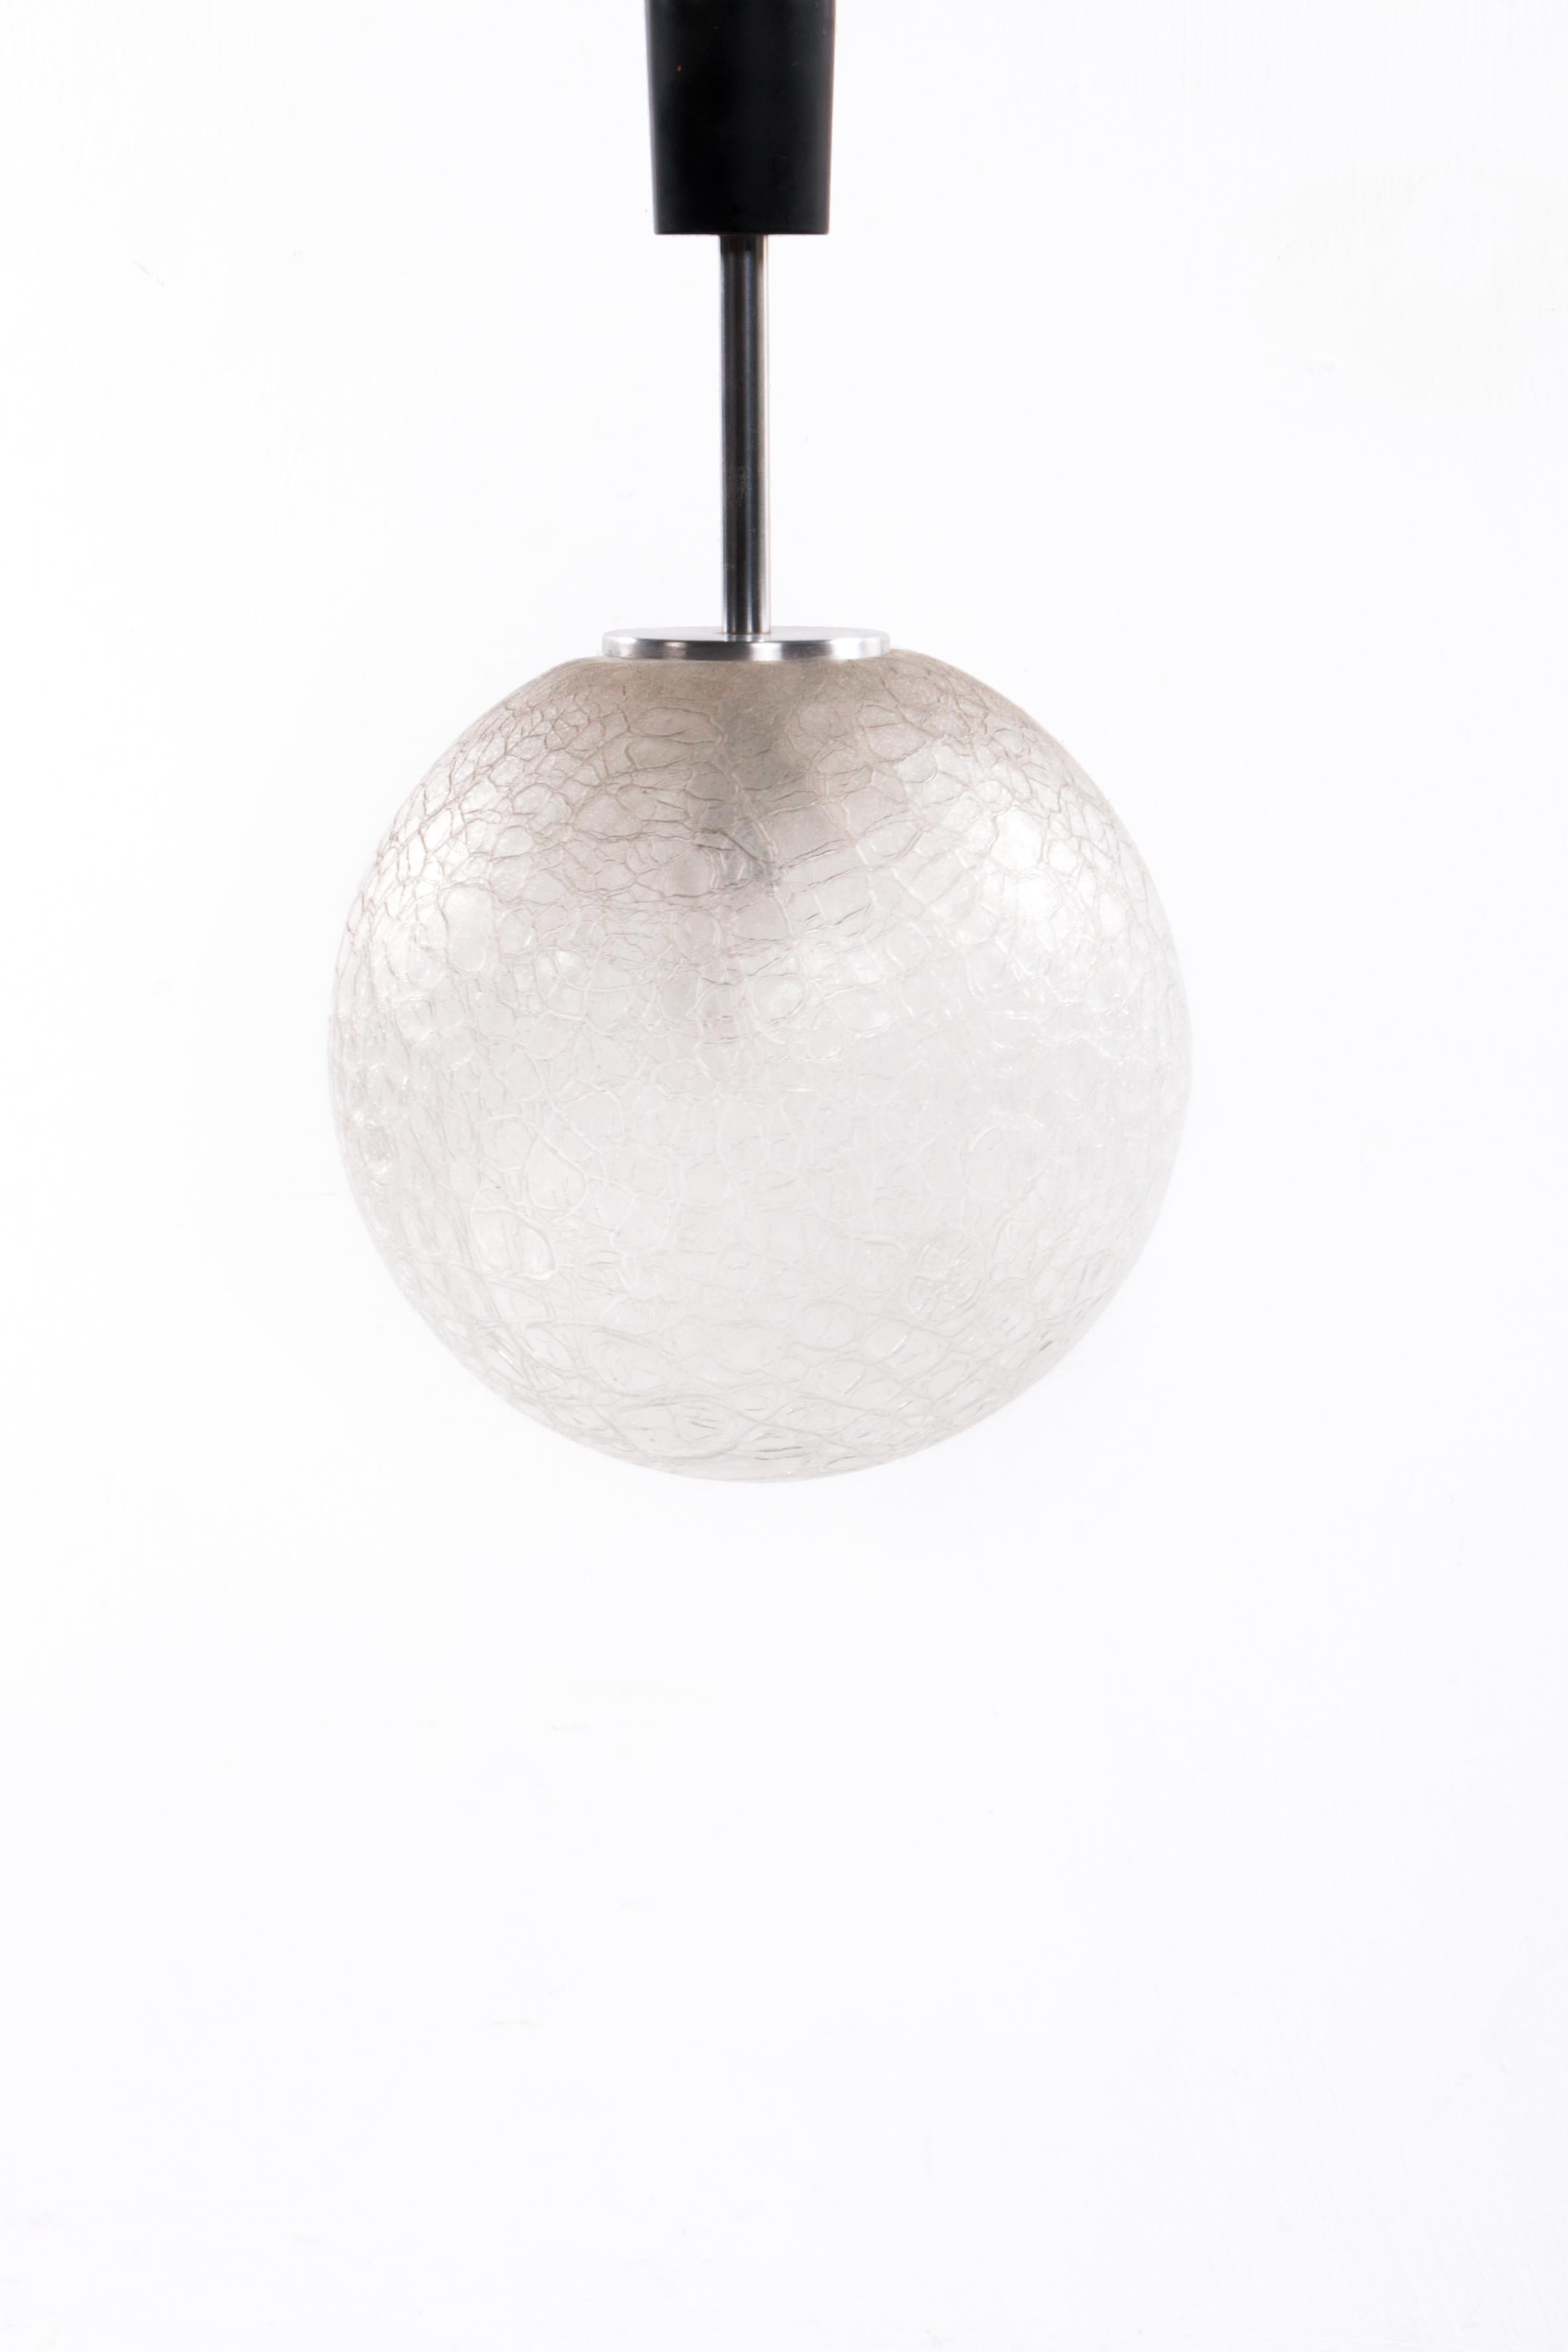 Glass Globe pendant lamp by Doria Leuchten, 1970s
Nice stylish light object, fits perfectly in a sleek modern interior with a lot of daylight with a few 'eye catchers' here and there, whether or not also in 'Ice Glass'.

Period: 1960s -